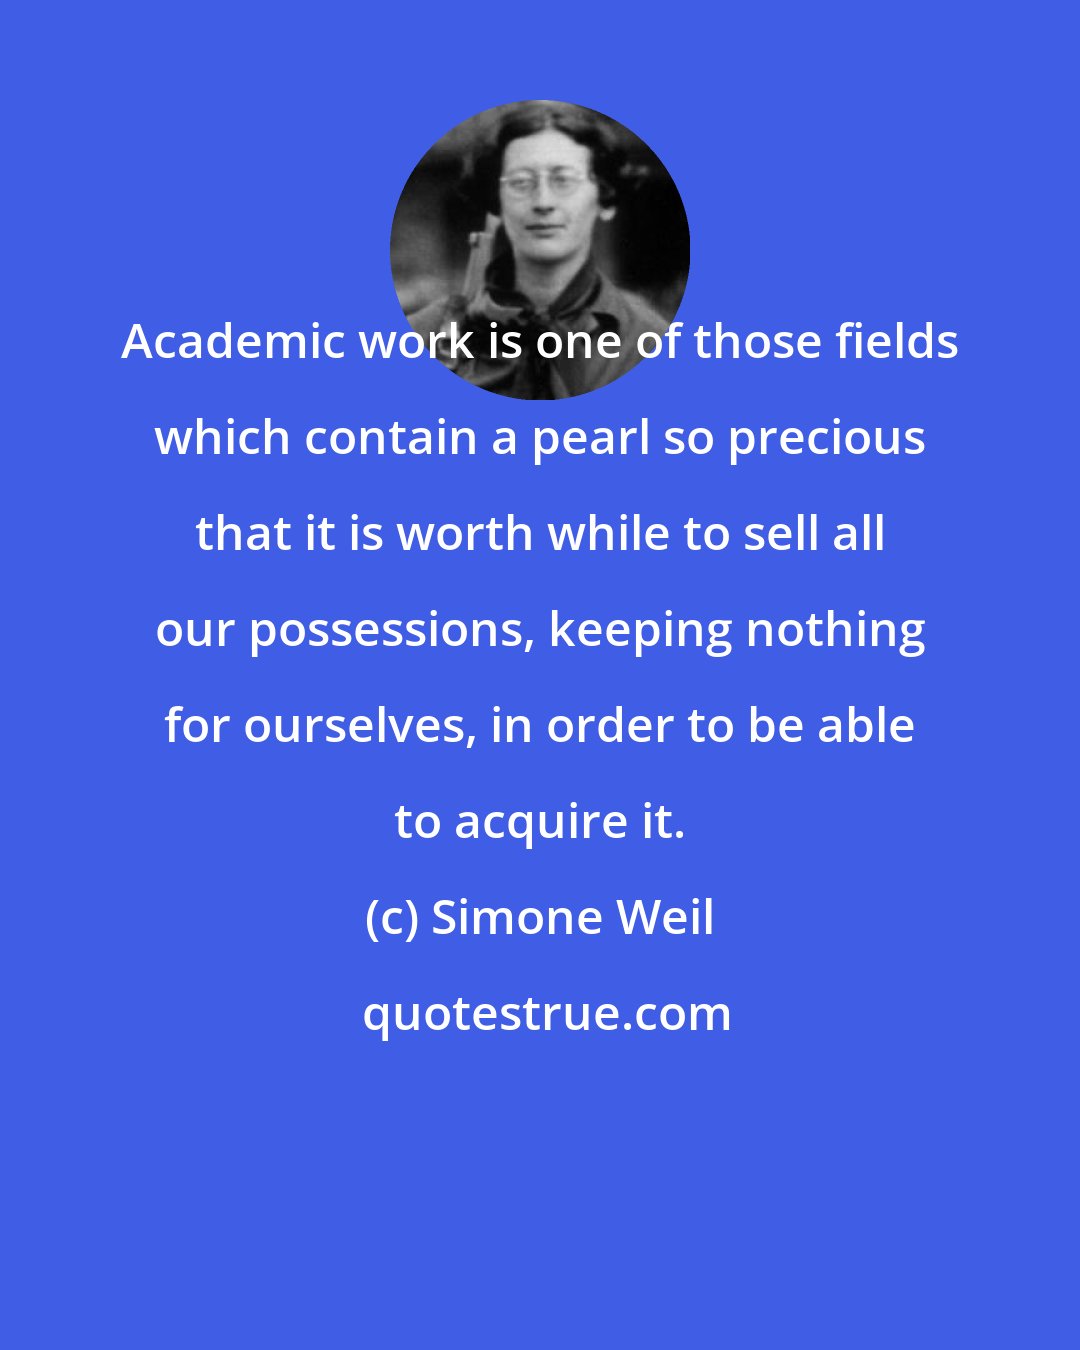 Simone Weil: Academic work is one of those fields which contain a pearl so precious that it is worth while to sell all our possessions, keeping nothing for ourselves, in order to be able to acquire it.